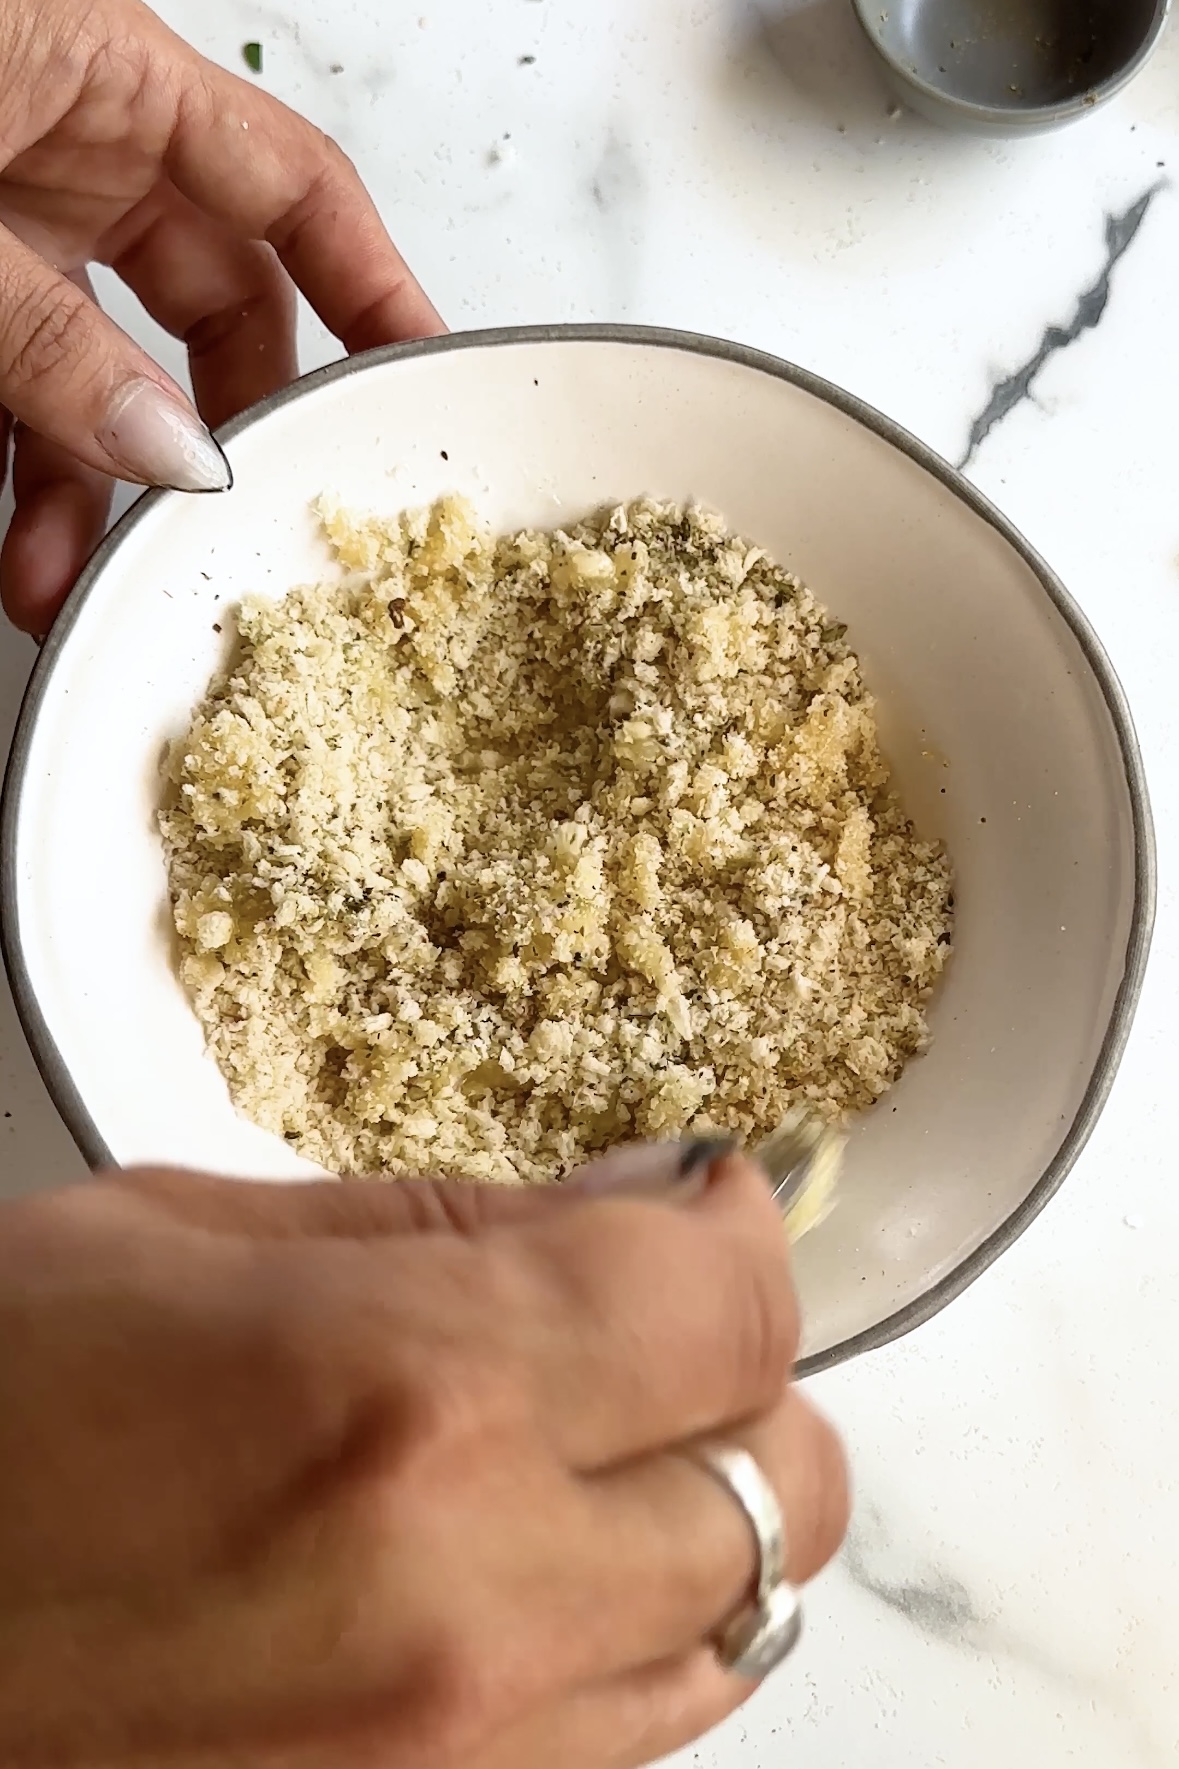 Bread crumbs and butter are stirred together.